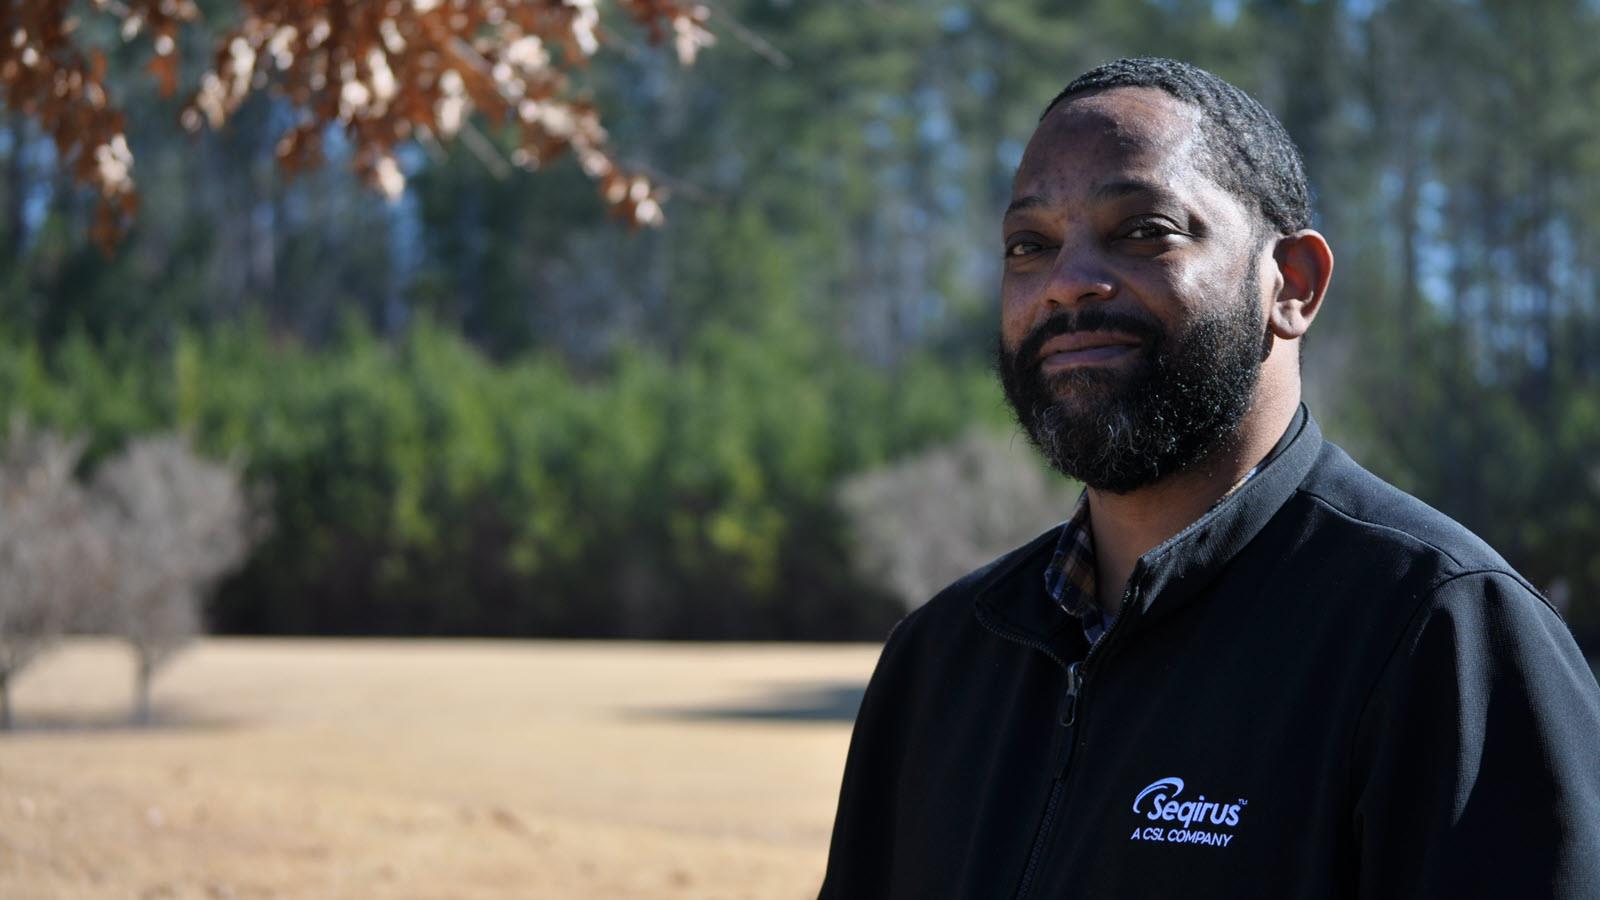 Portrait of Seqirus employee Tab Lassiter outside wearing a black polo shirt with the company logo